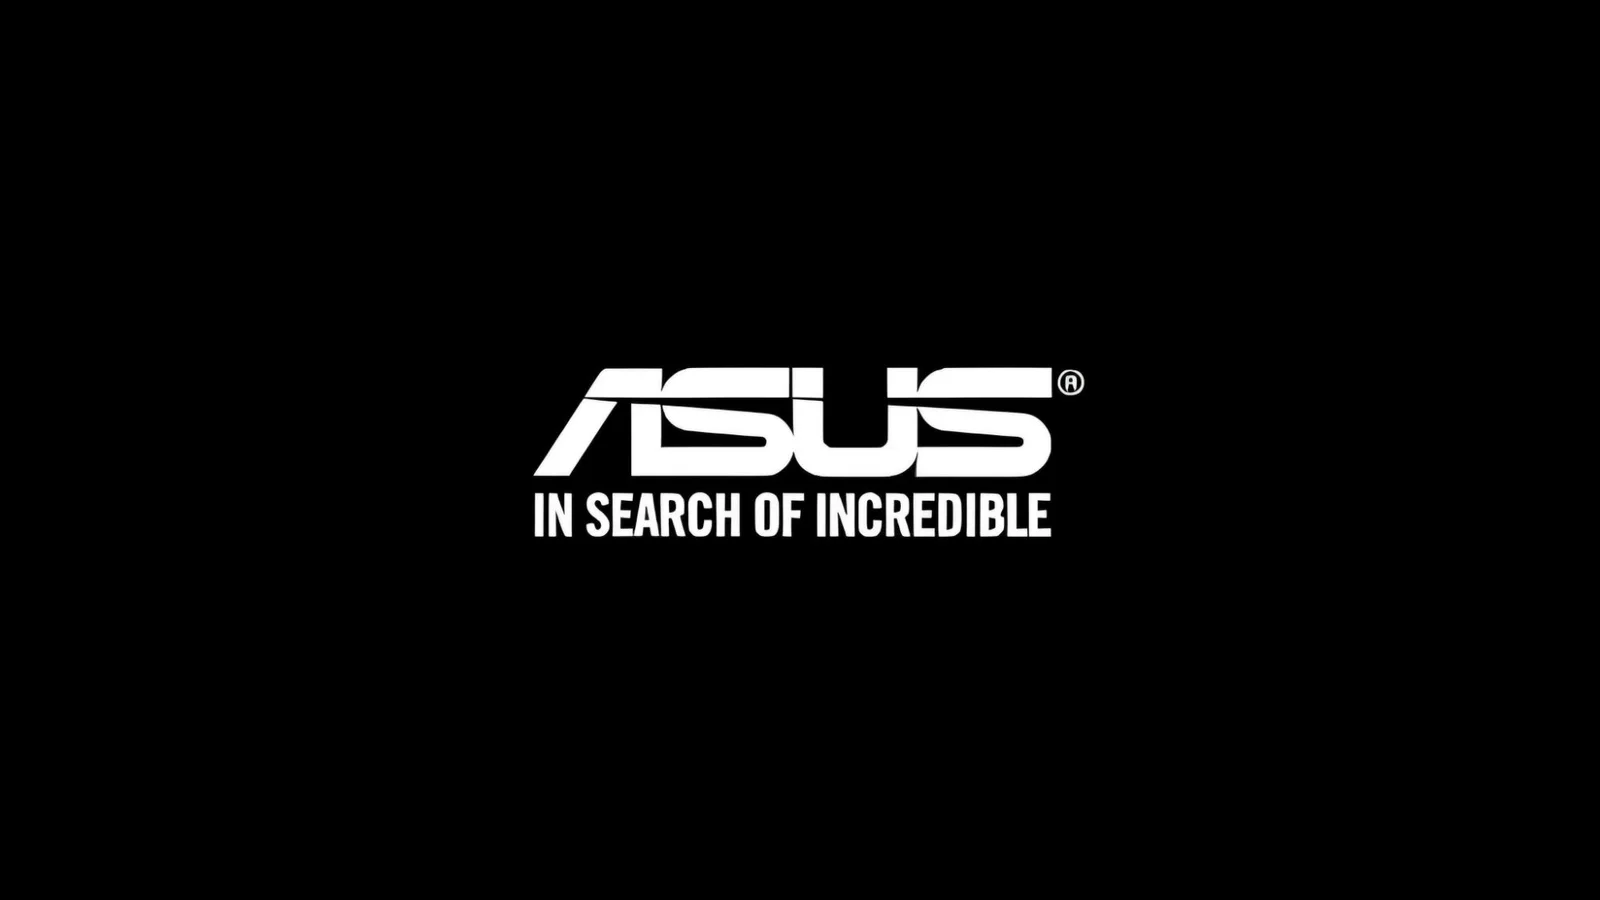 Asus is making substantial investments